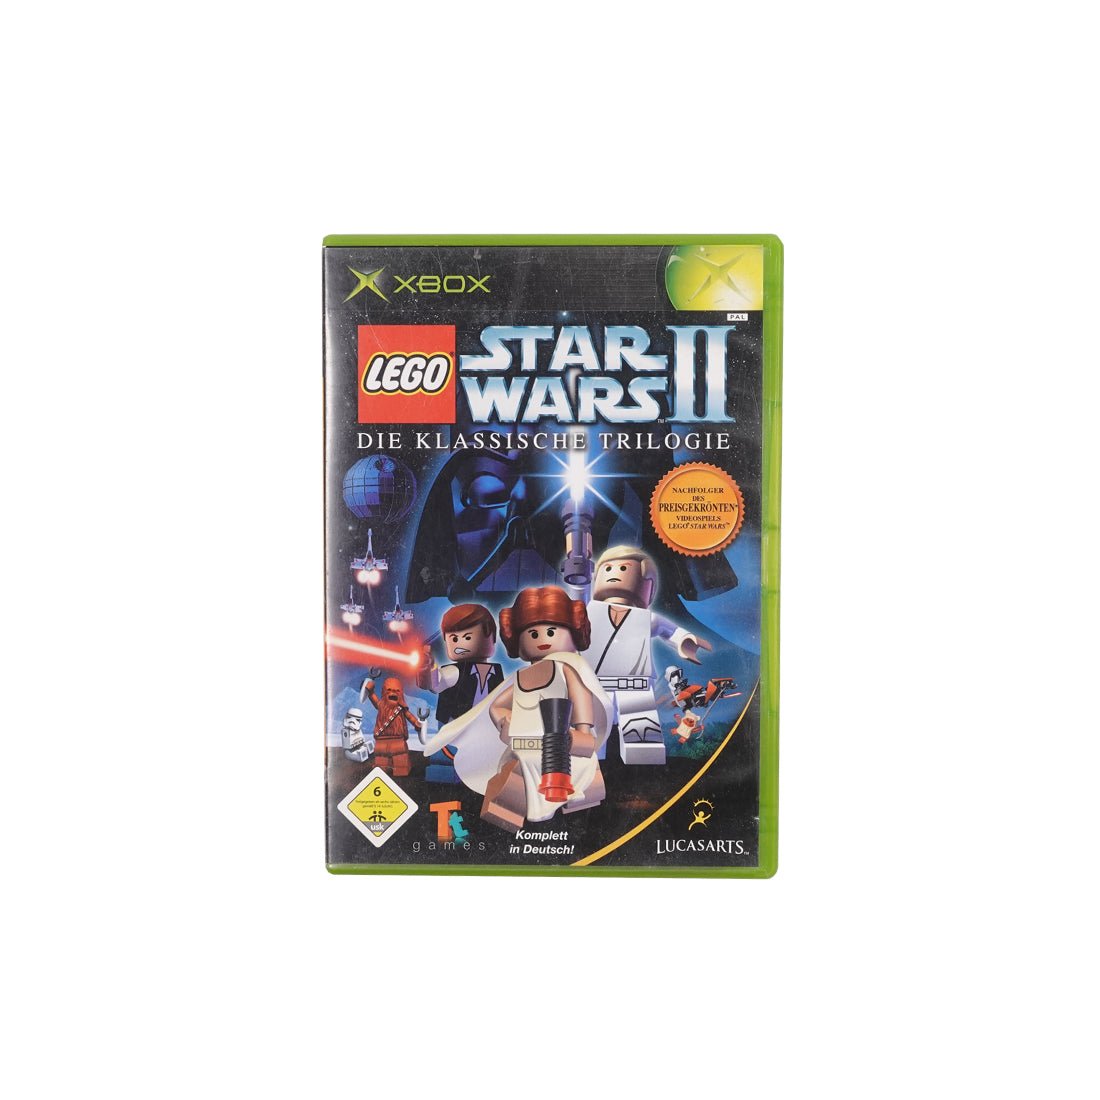 (Pre-Owned) Lego Star Wars 2: German Edition- Xbox - Store 974 | ستور ٩٧٤